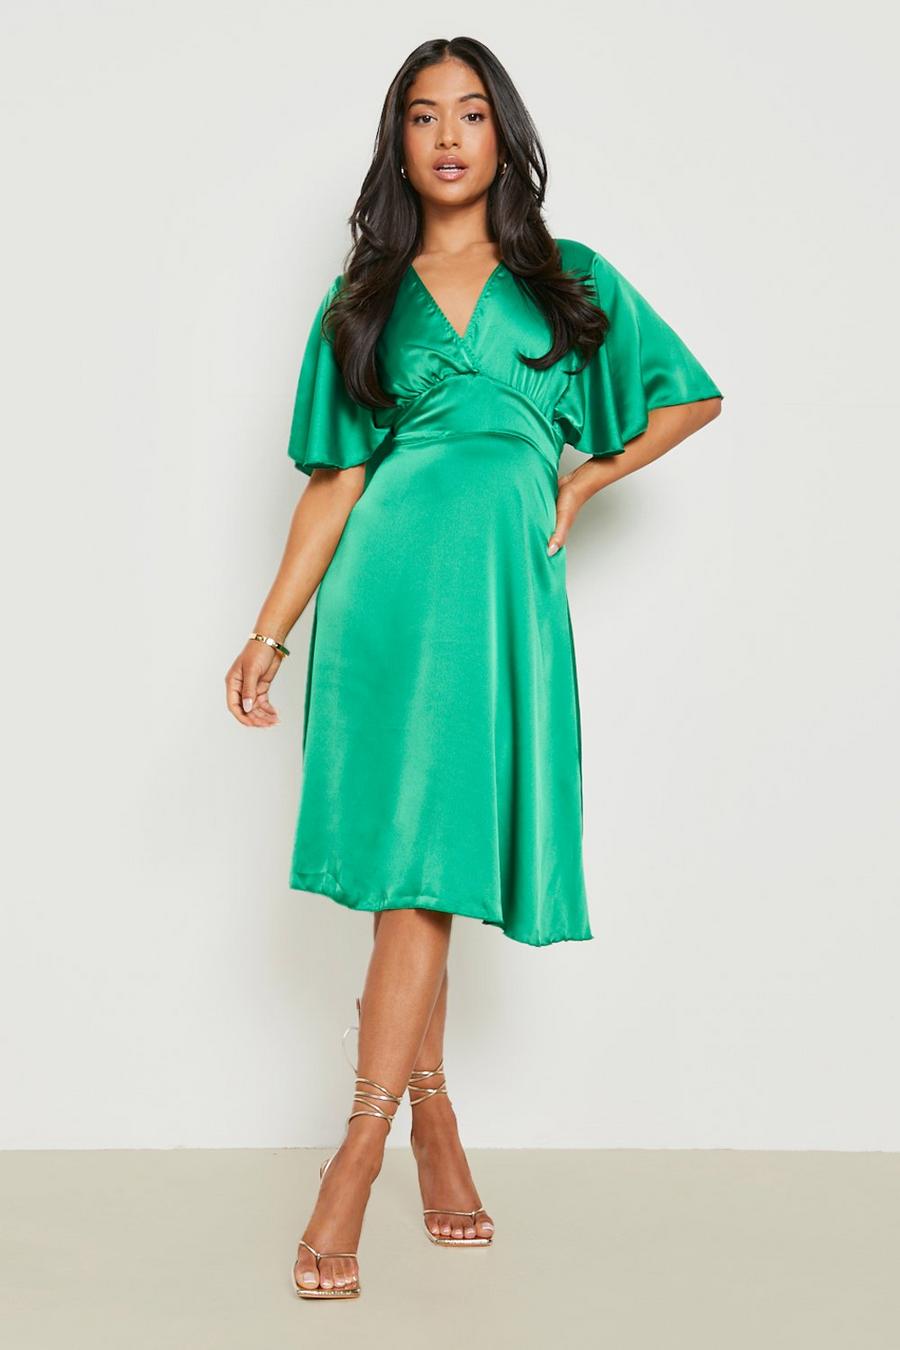 Buy Magic Bird Women's Sleeveless Fully Stitched Plain and Solid Gown Dress  with Ankle Length and Square Neck Stylish(MB4-B.Green-XS) at